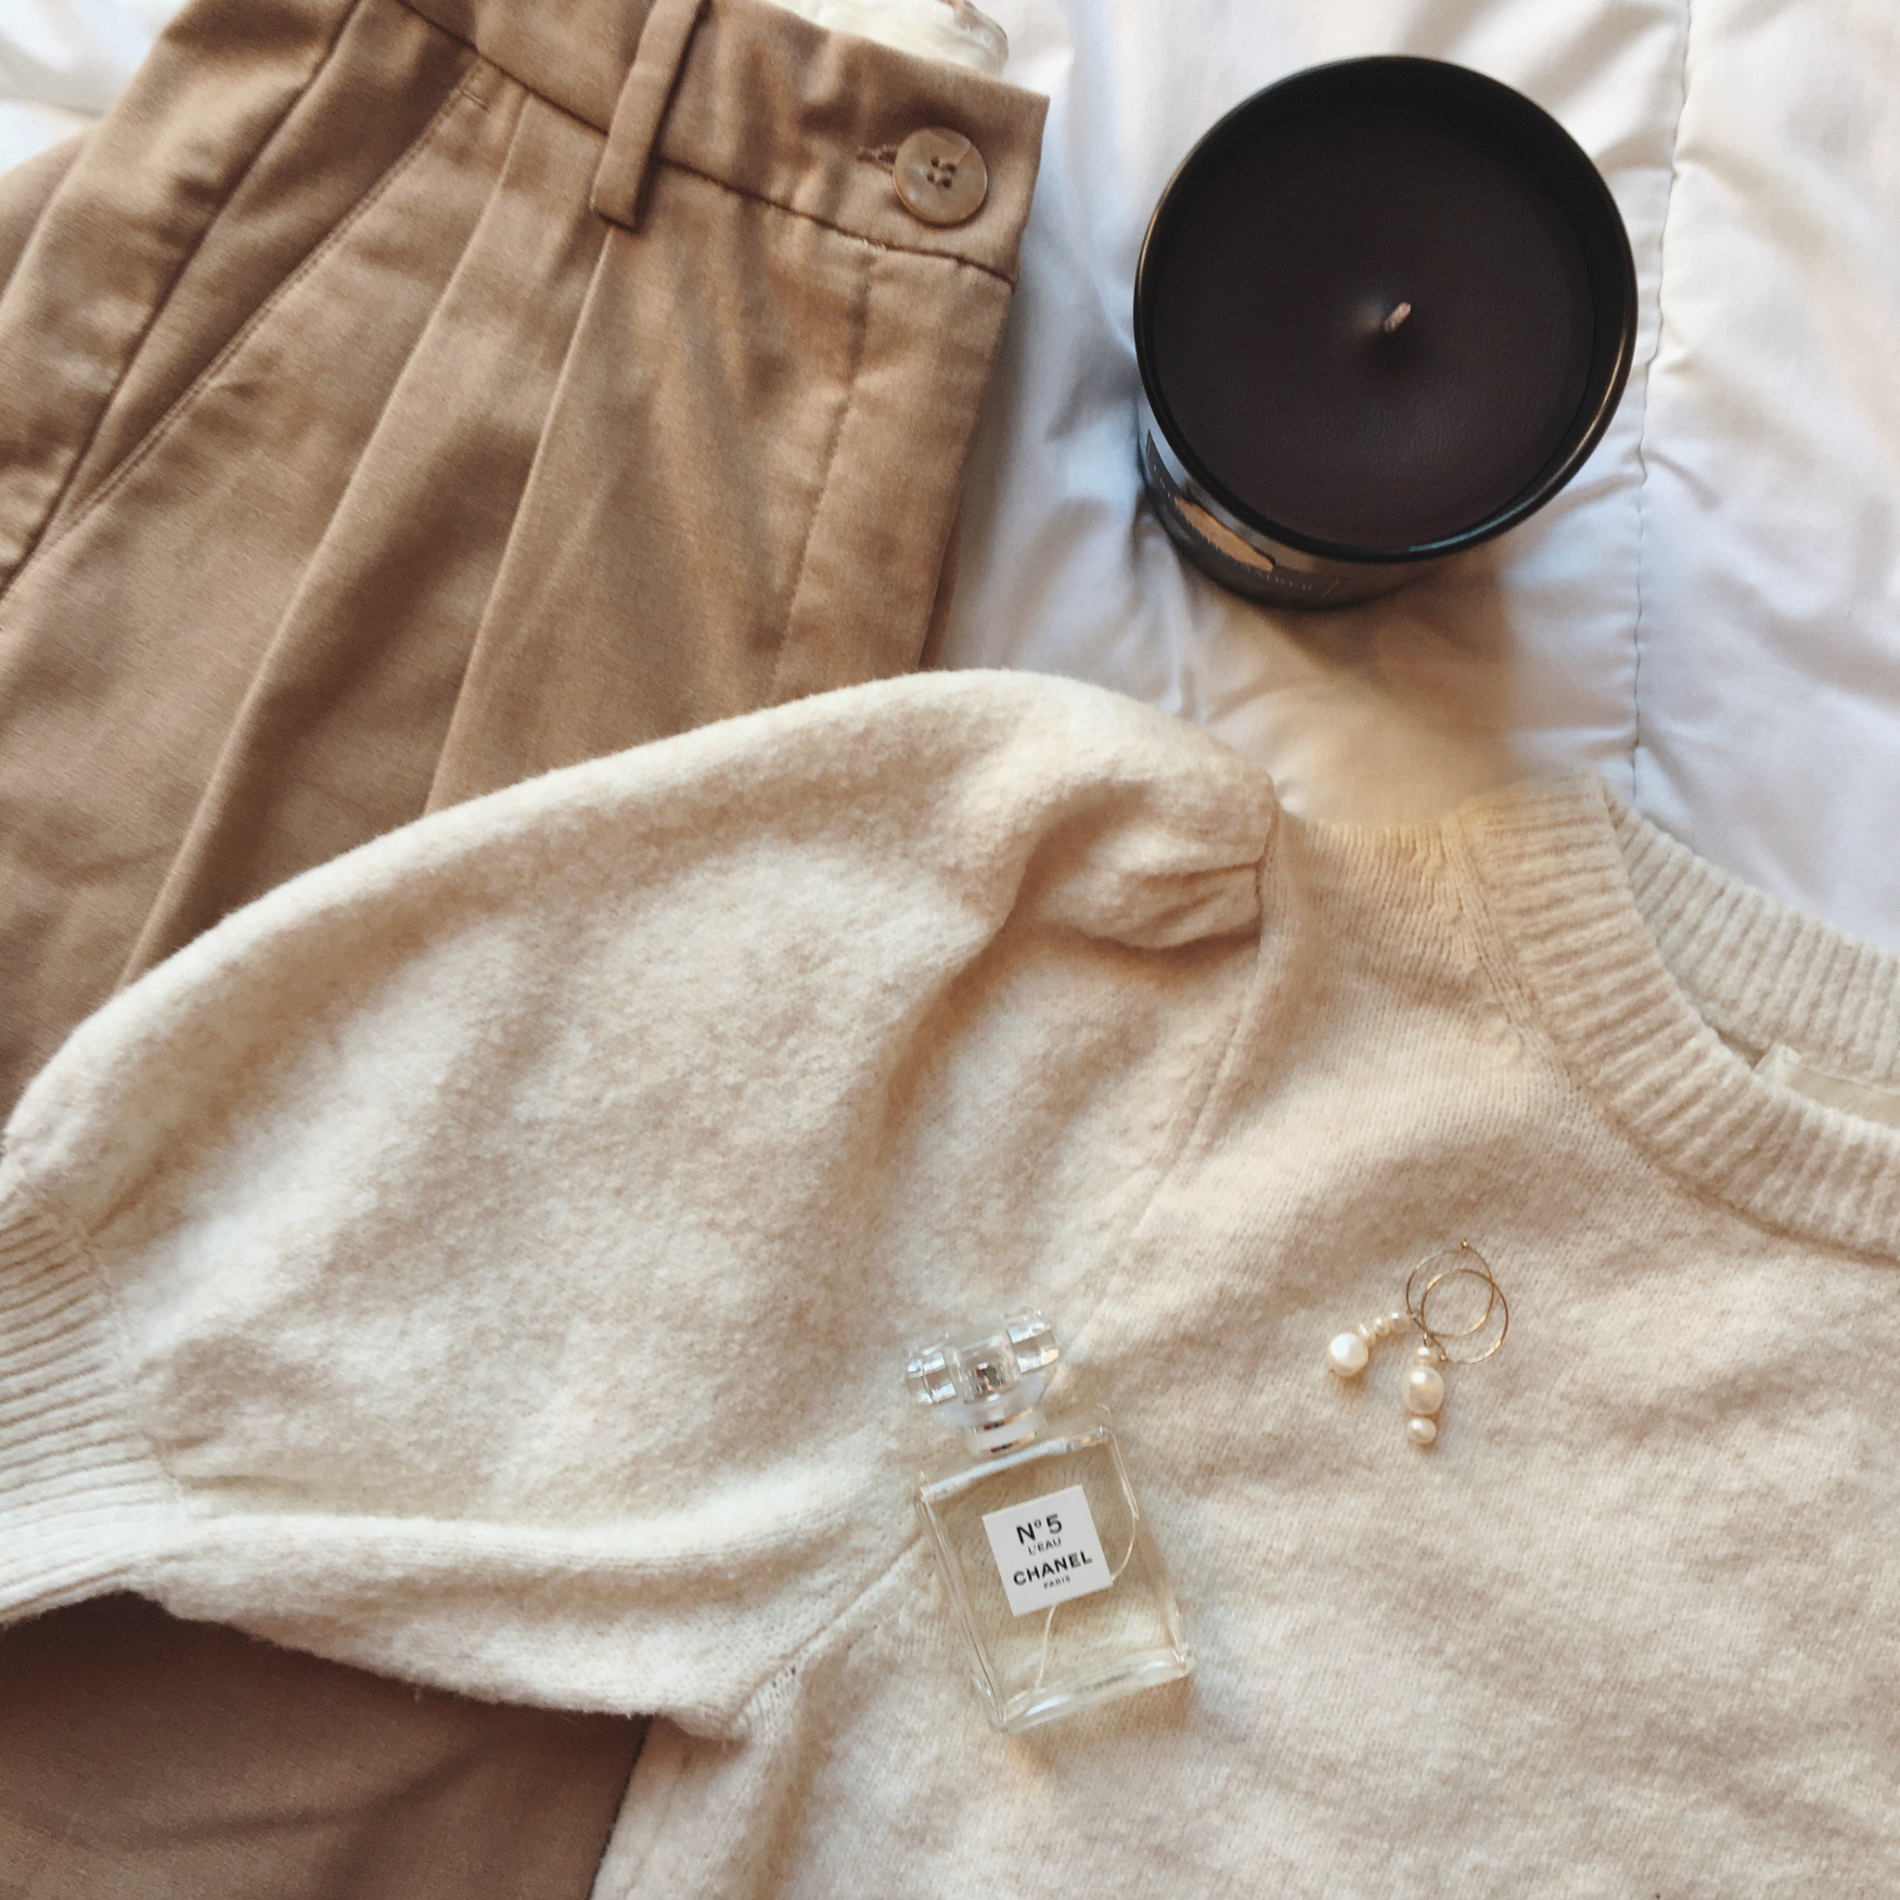 Find your personal style in 4 simple steps - fashion blog - Rituals candle - white sweater - beige pants - pearl earrings